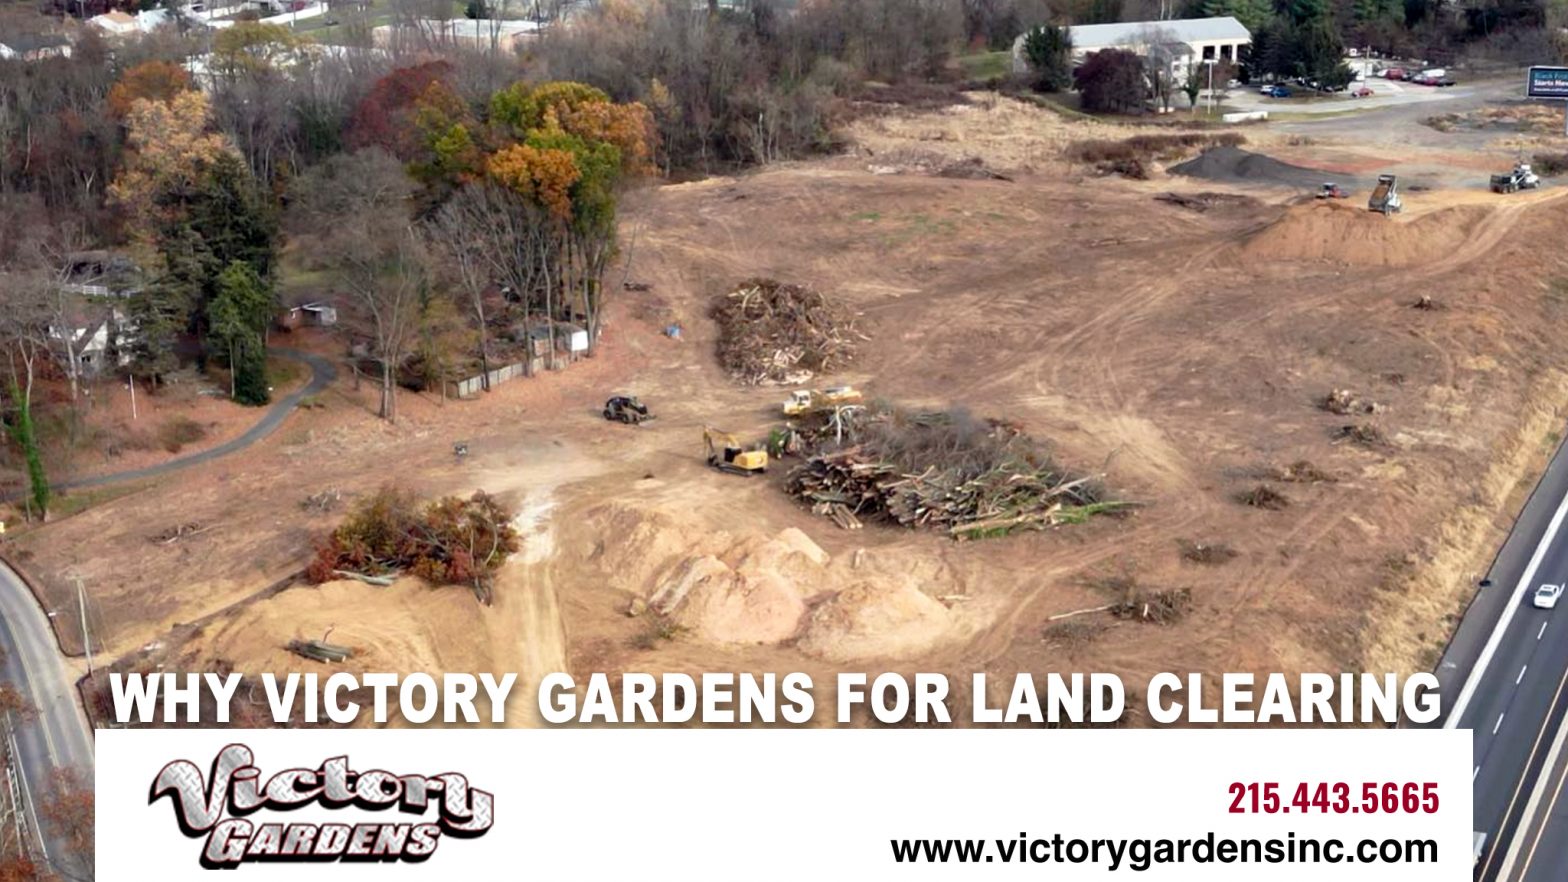 Victory Gardens For Land Clearing